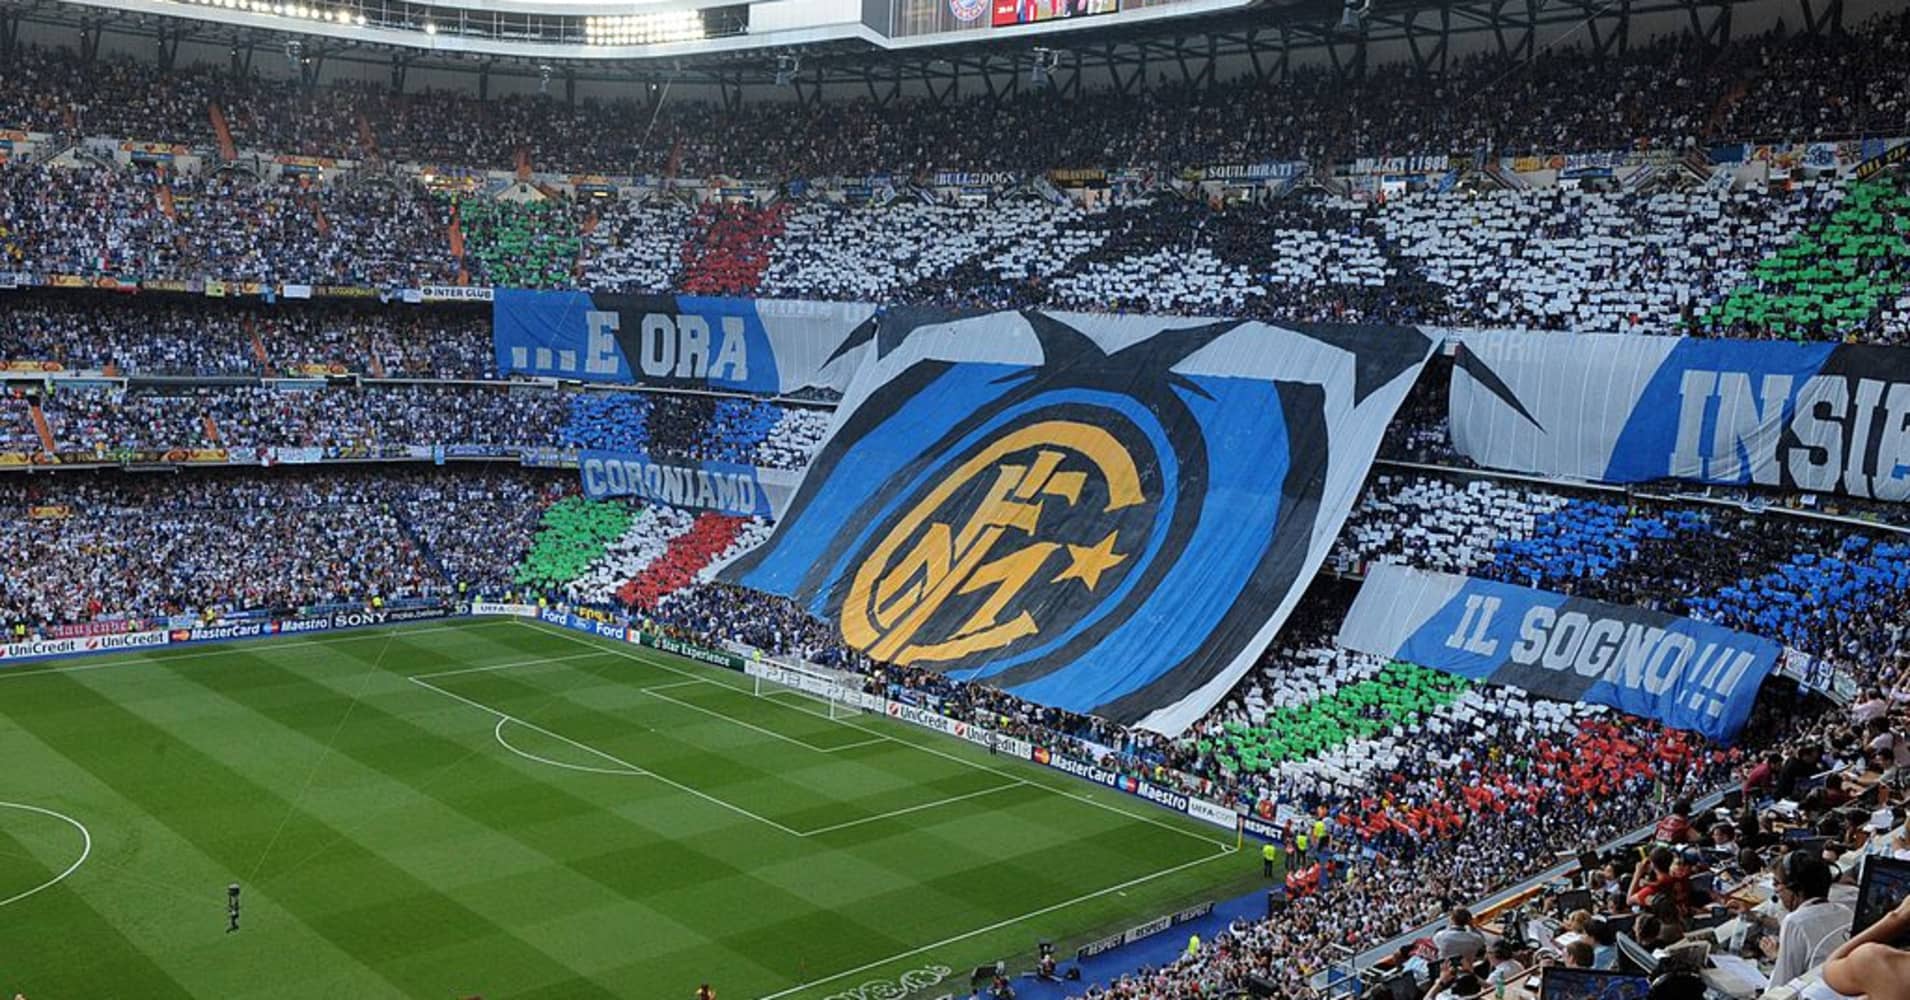 Owner of Inter Milan asks fans to have 'patience and trust' despite